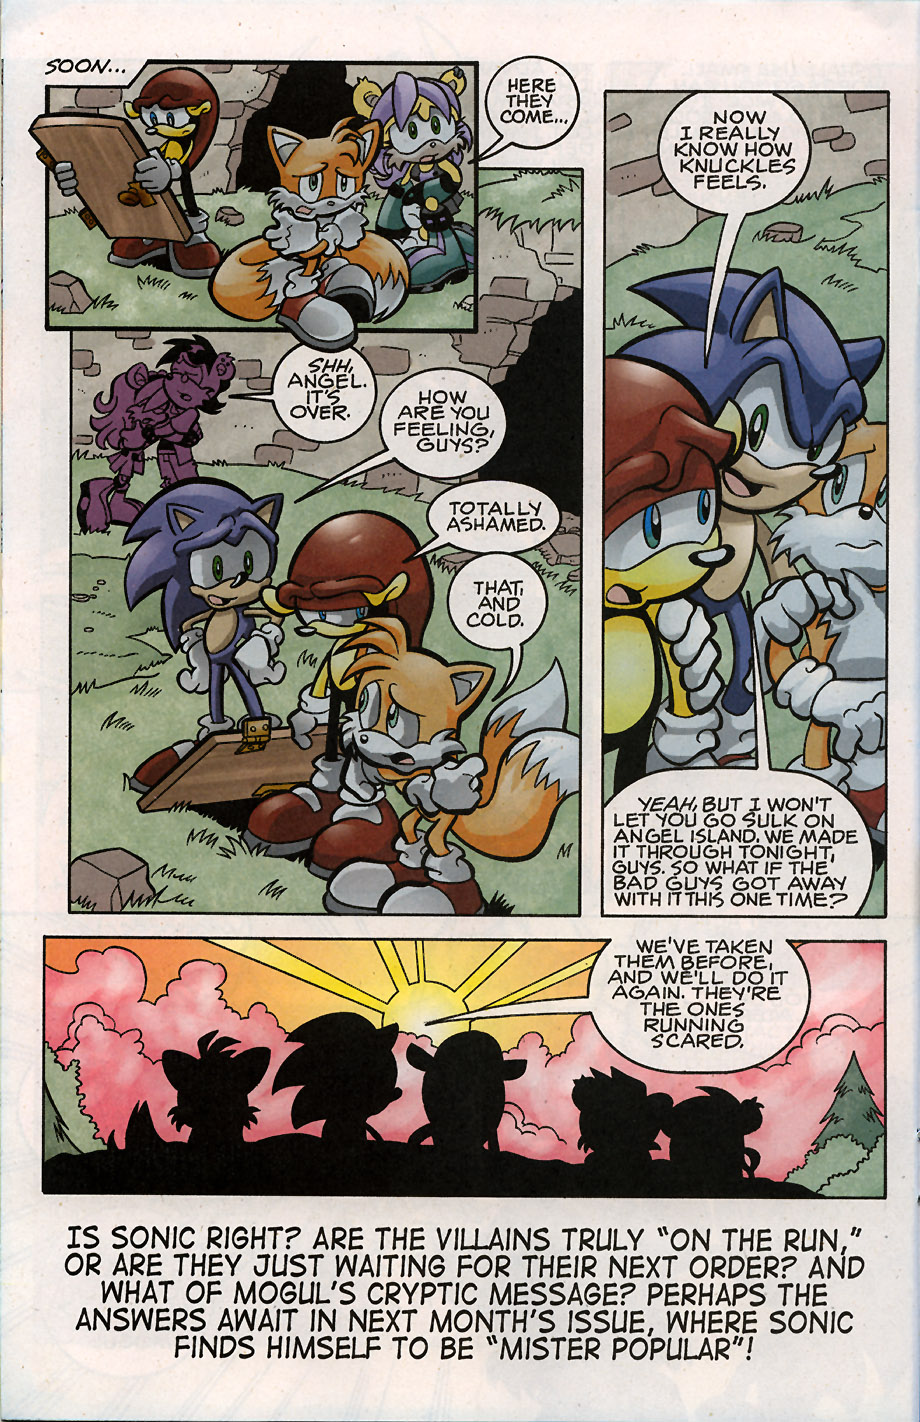 Sonic - Archie Adventure Series May 2008 Page 14